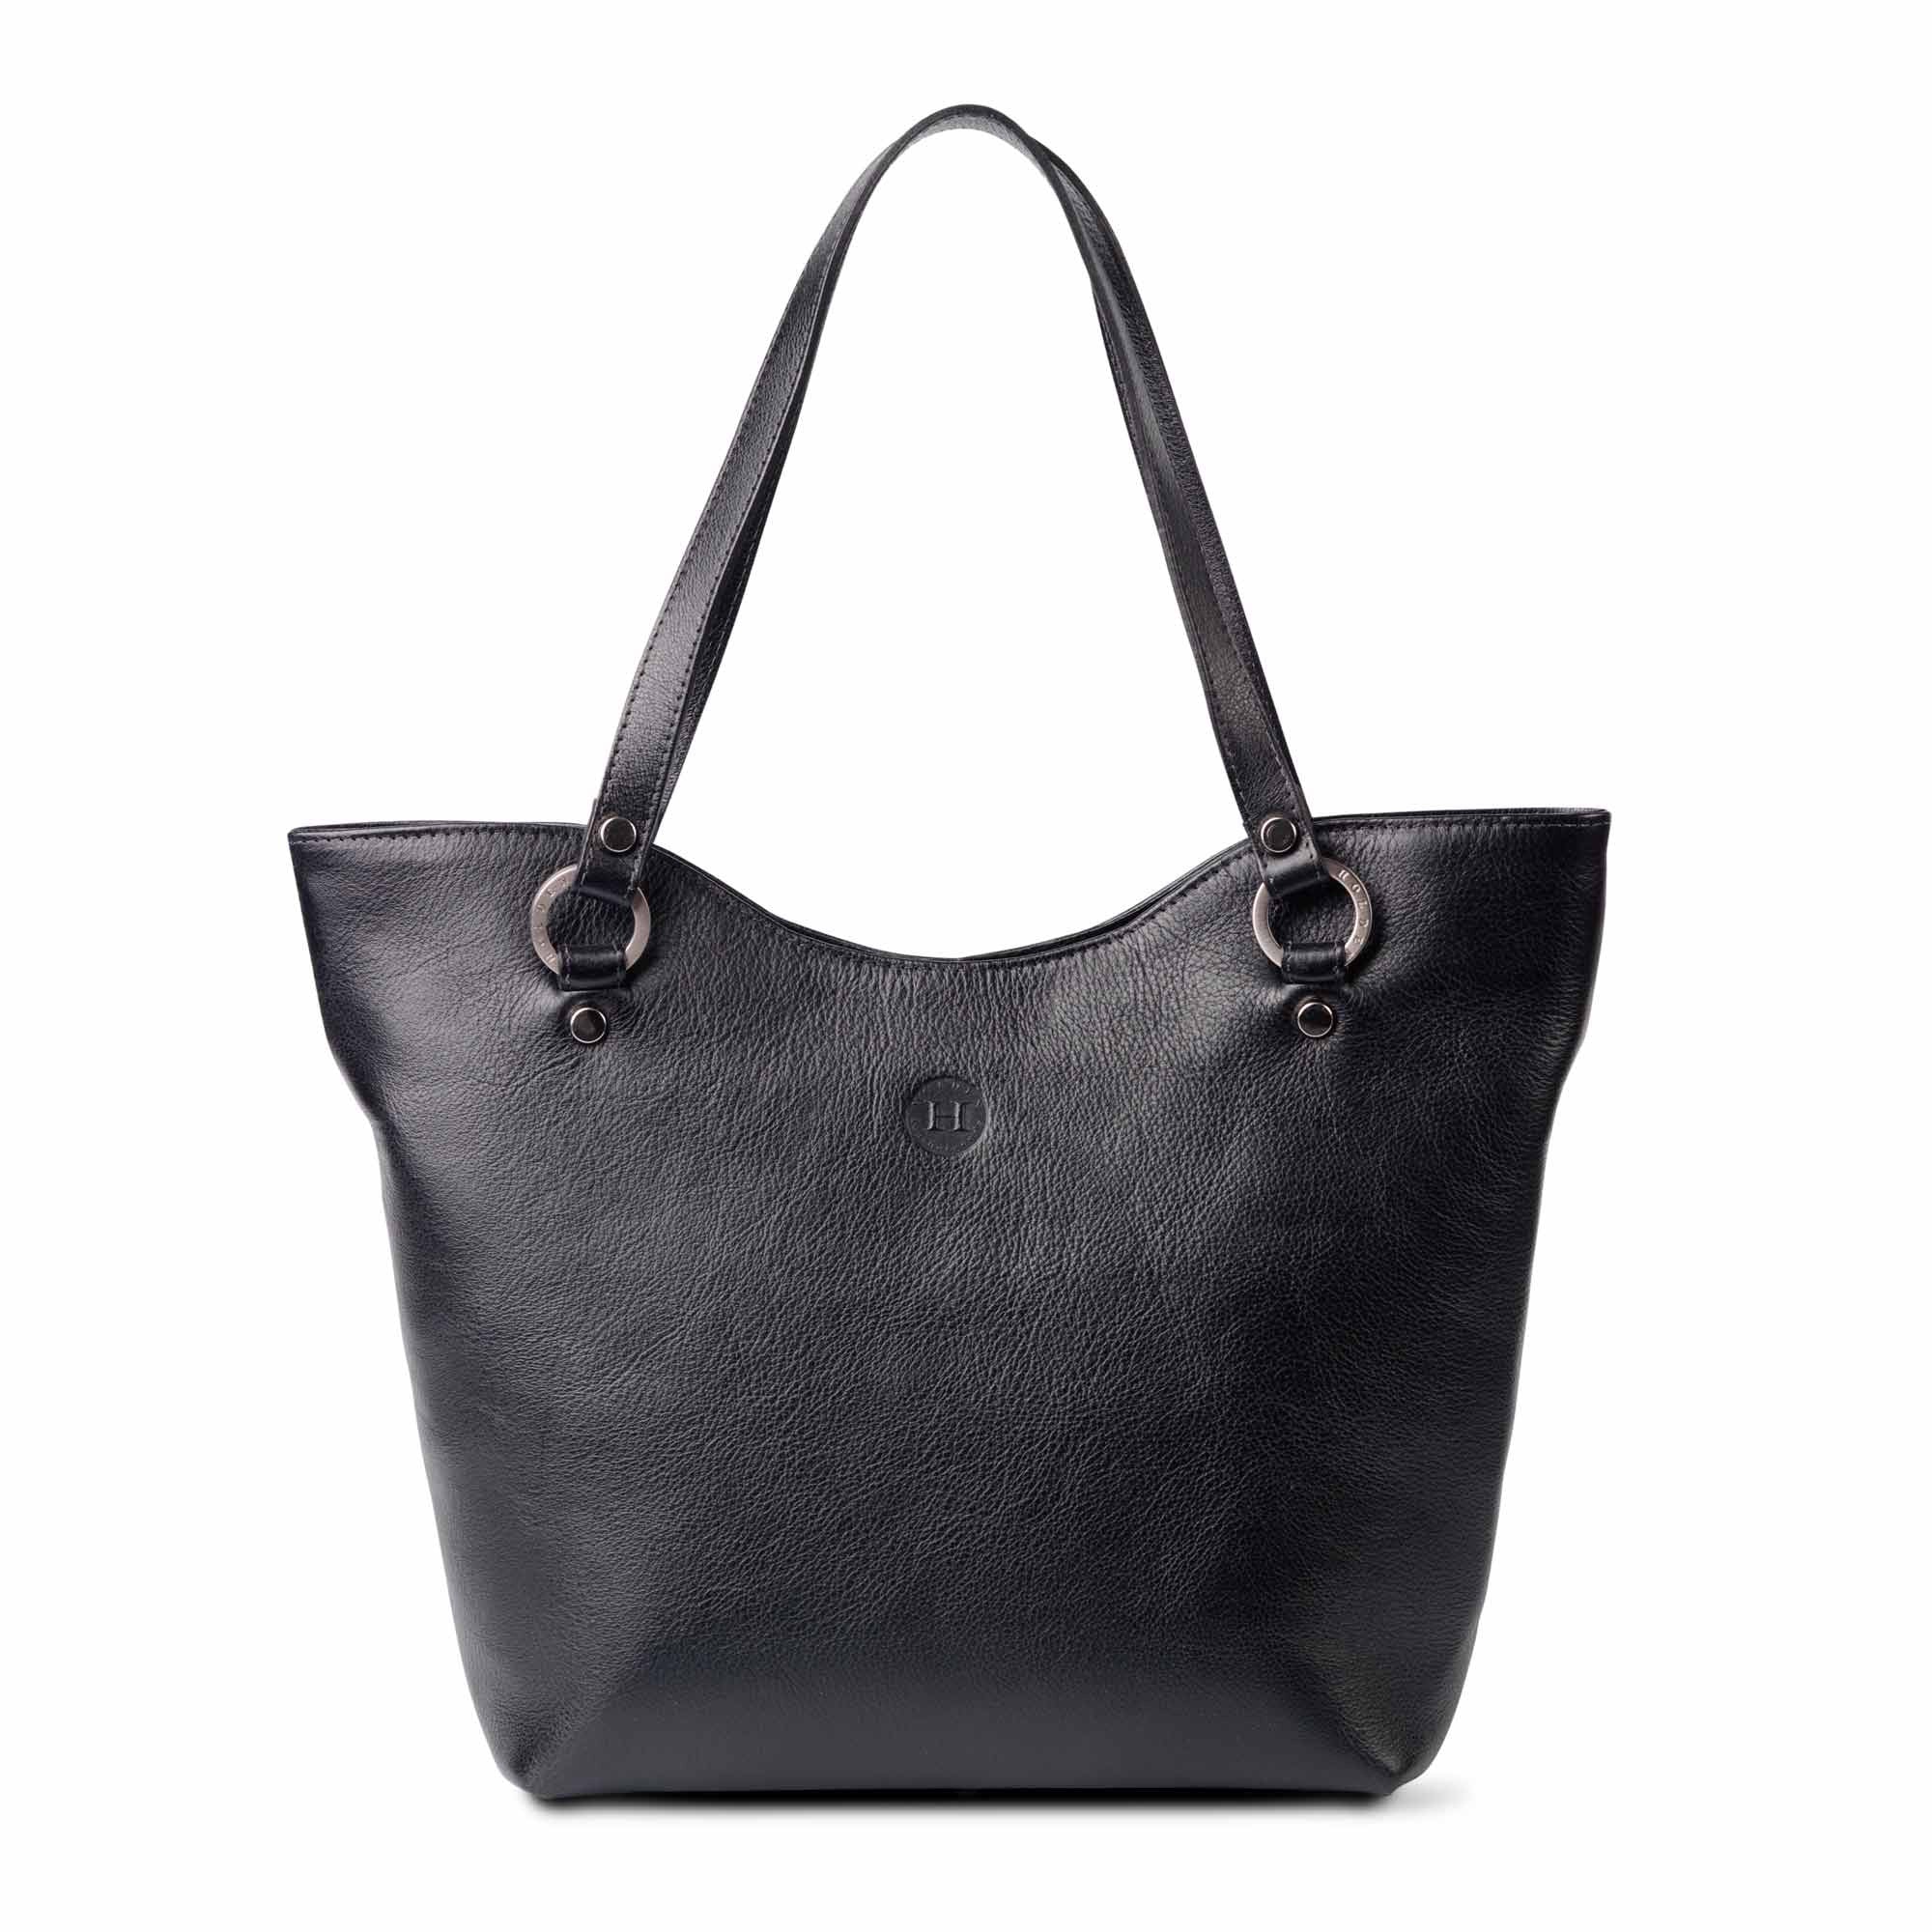 Caitlin Large Leather Tote Black - Holden Leathergoods, leather bags handmade in Ireland